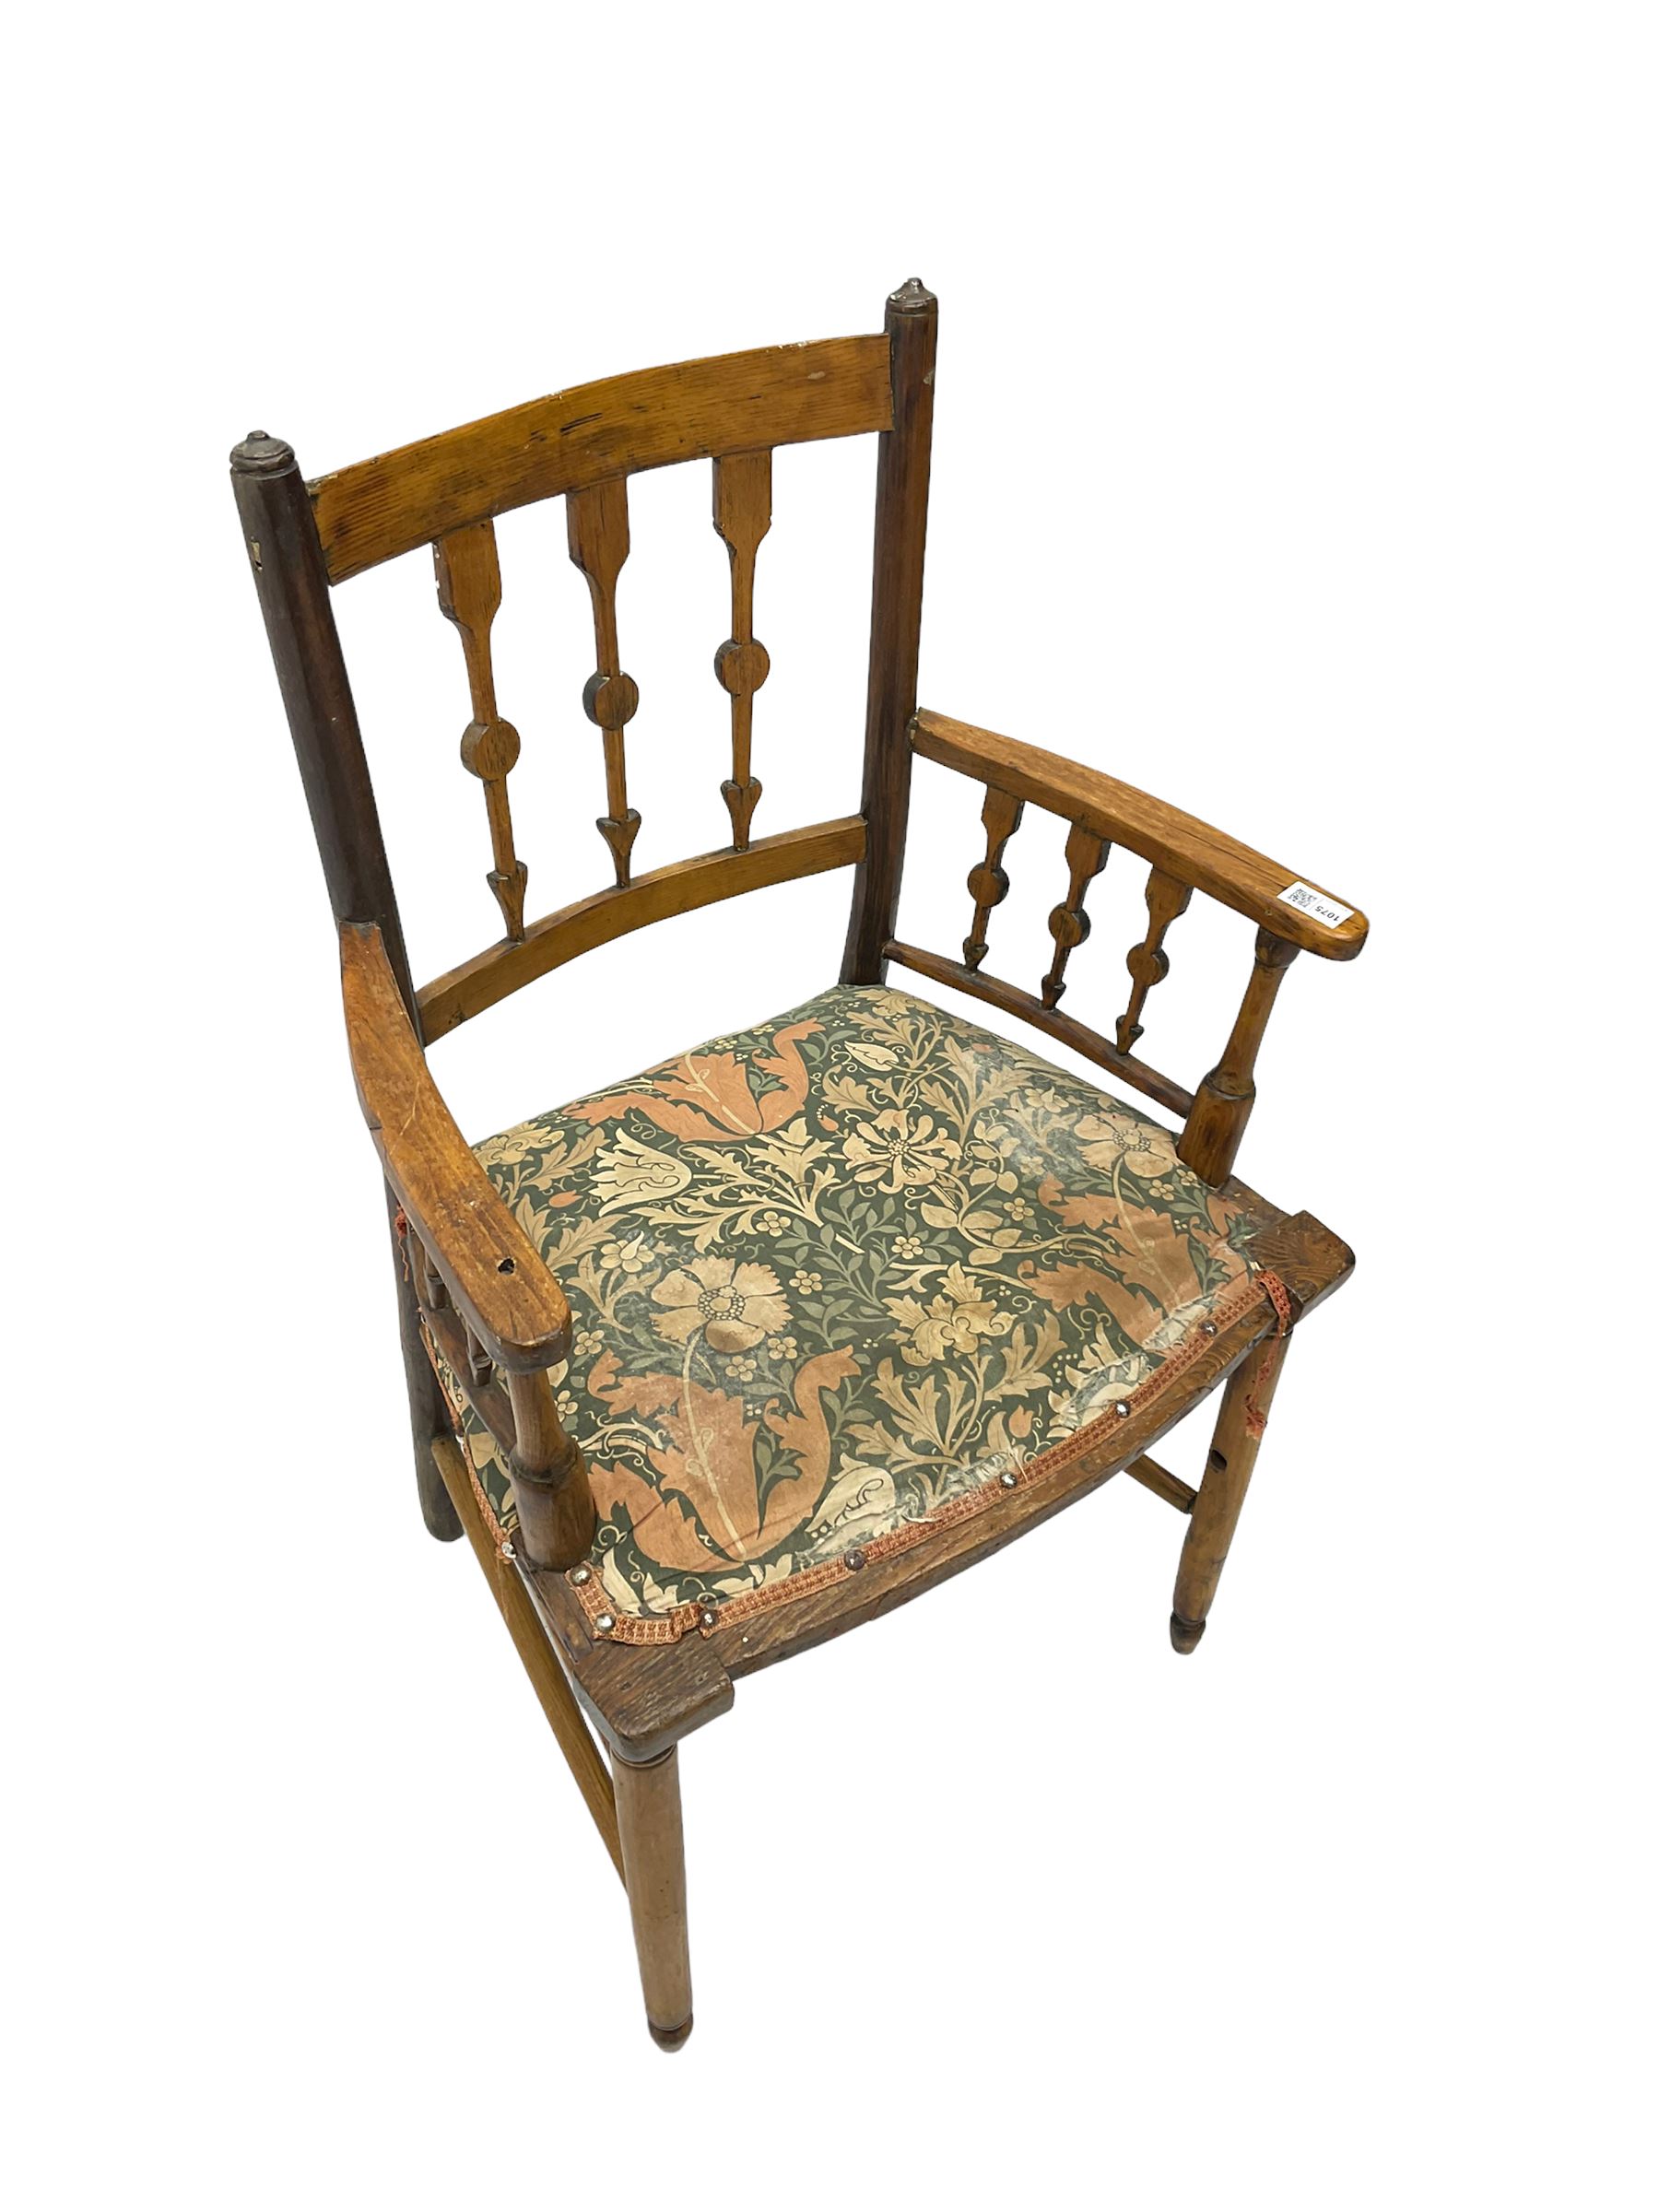 19th century ash and beech Sussex type elbow chair - Image 6 of 6